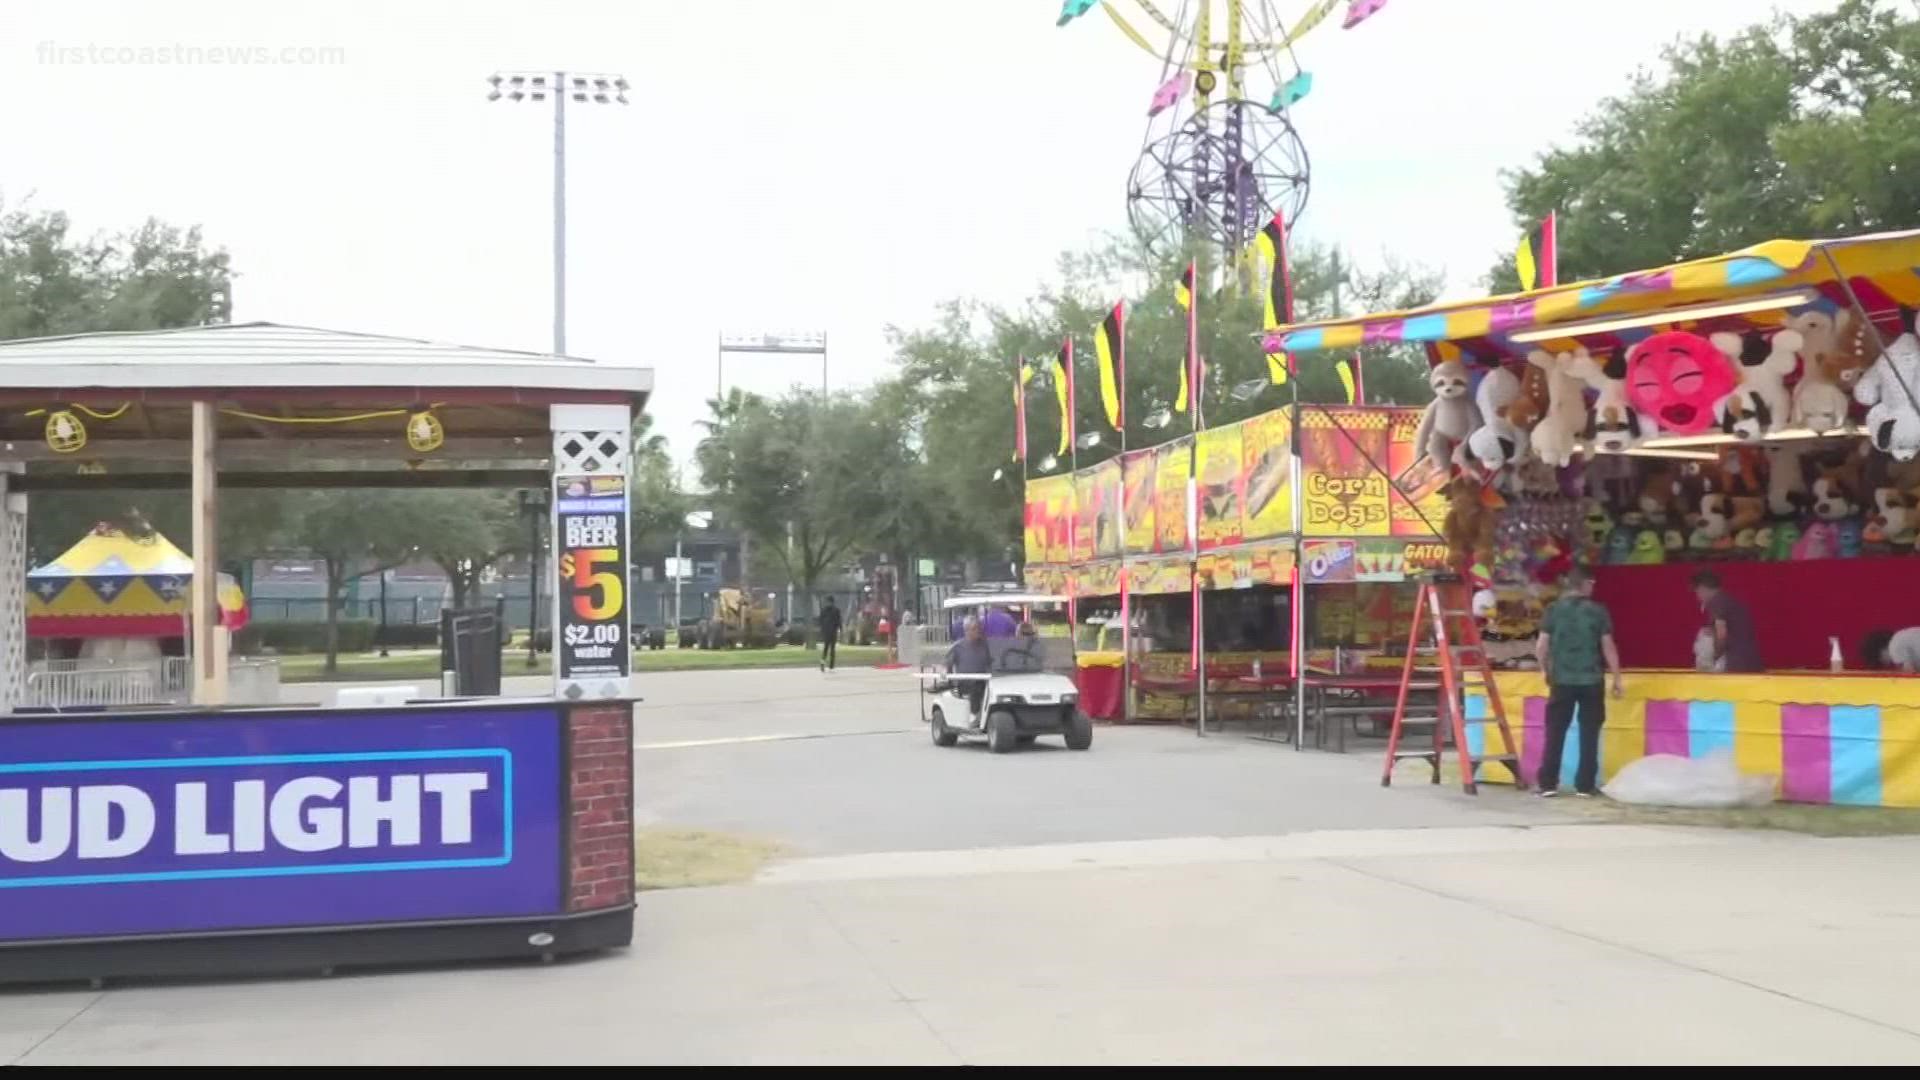 The fair also hired 30-40 police officers to patrol the area on top of hired security.